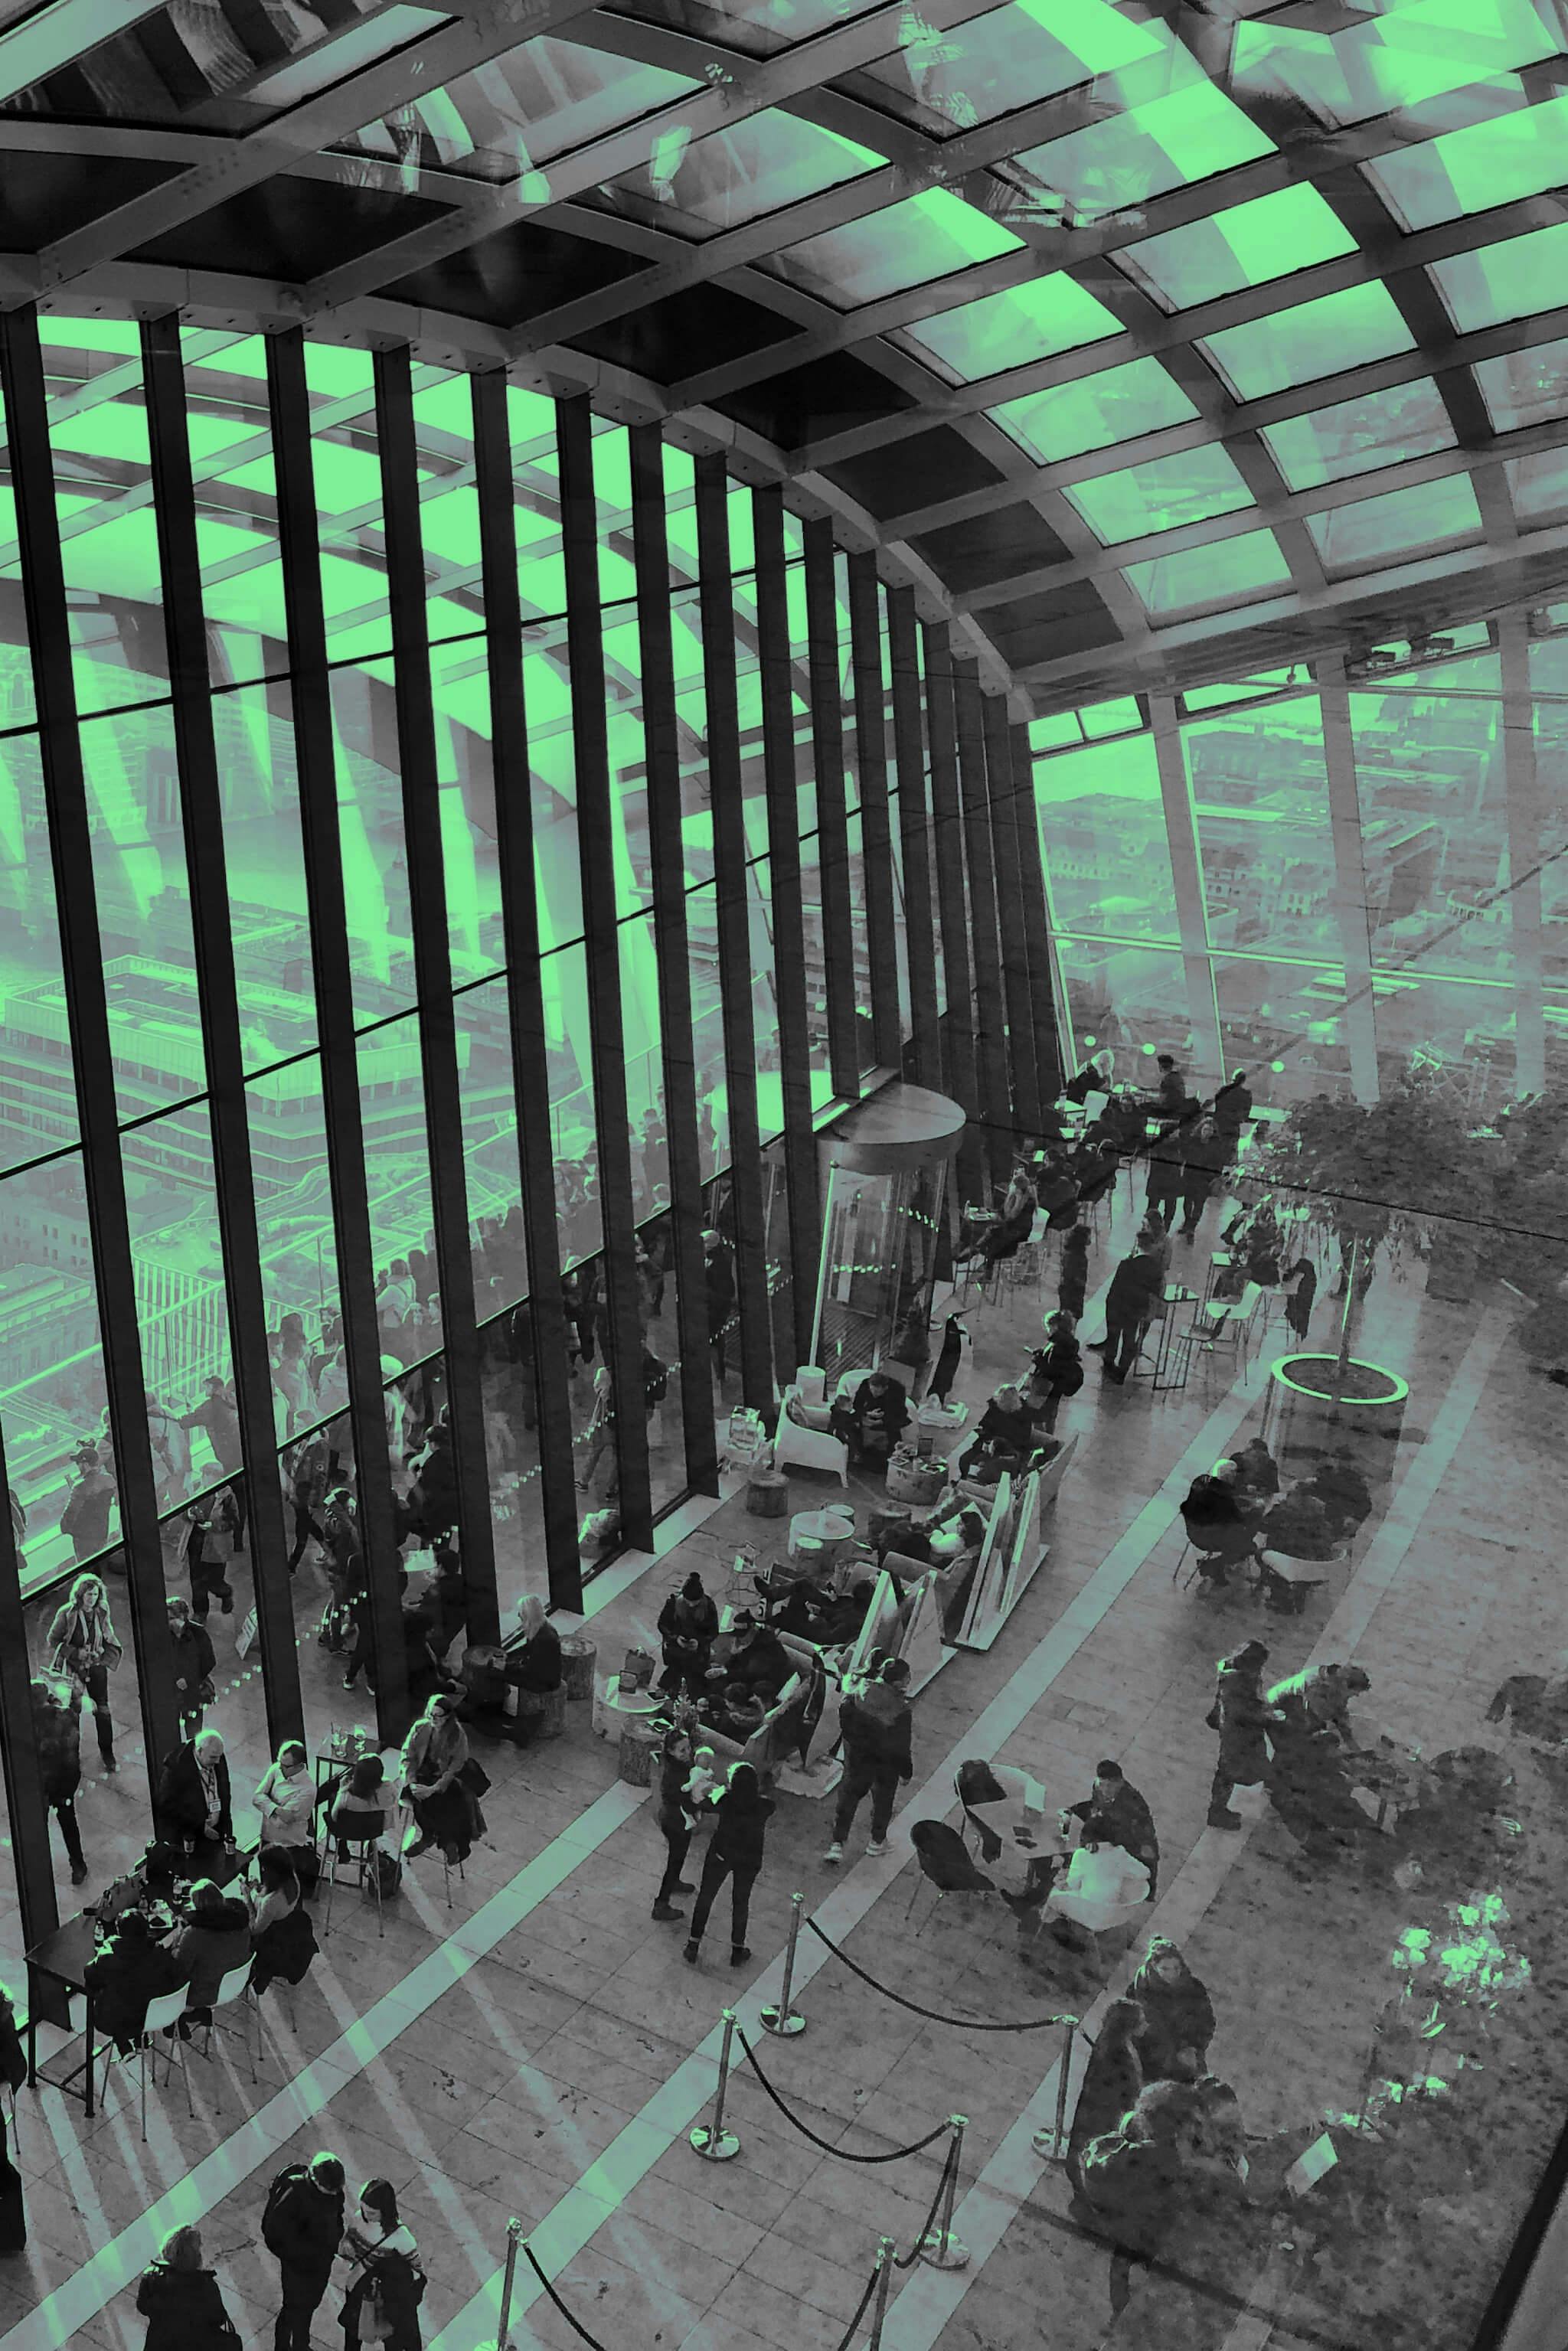 Panoramic view of people talking at the Sky Garden in London.